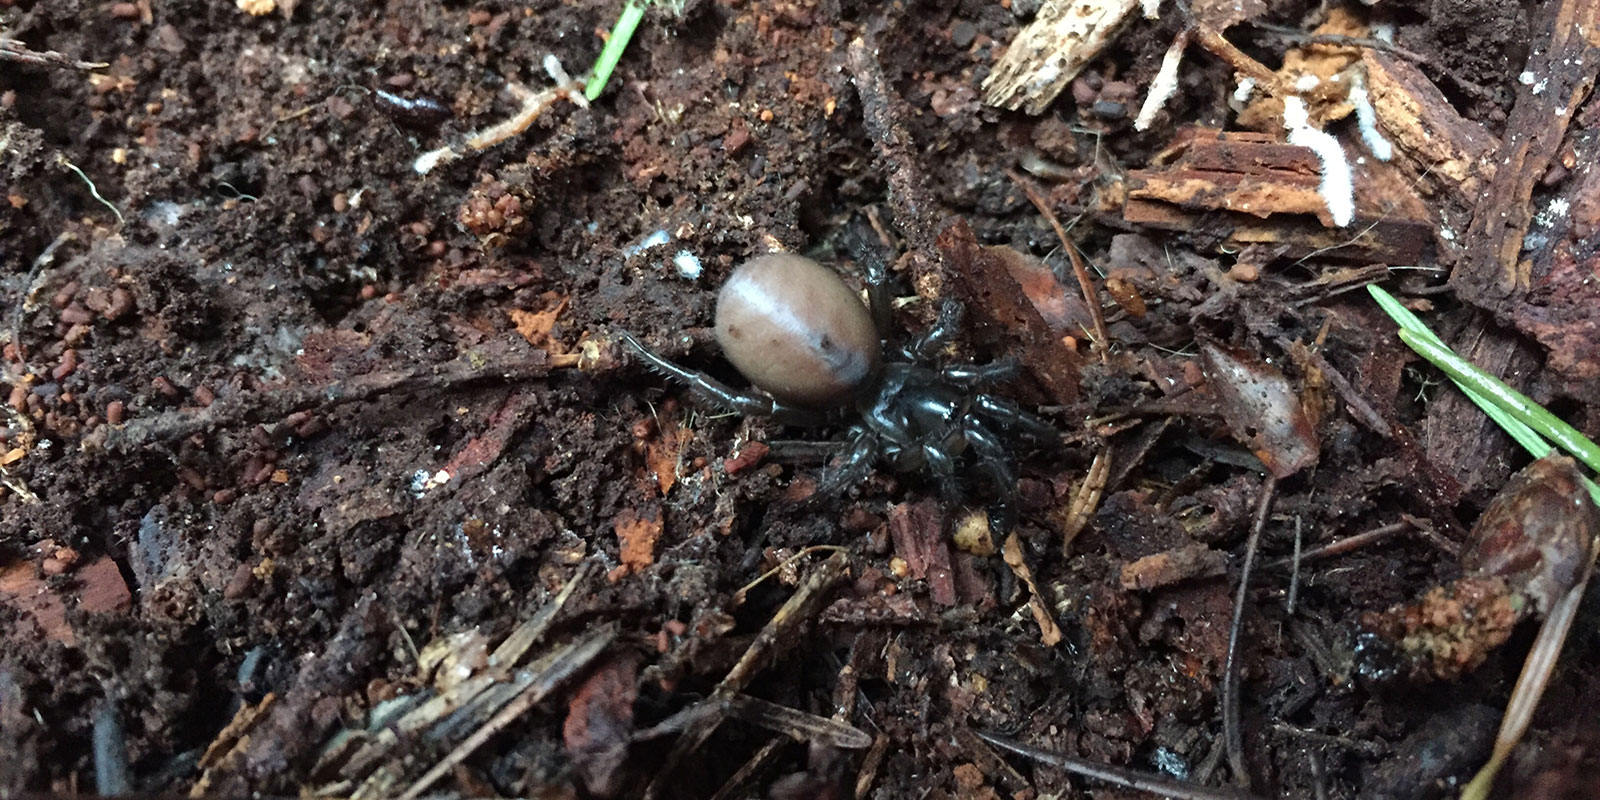 An Antrodiaetus pacificus in the forest floor